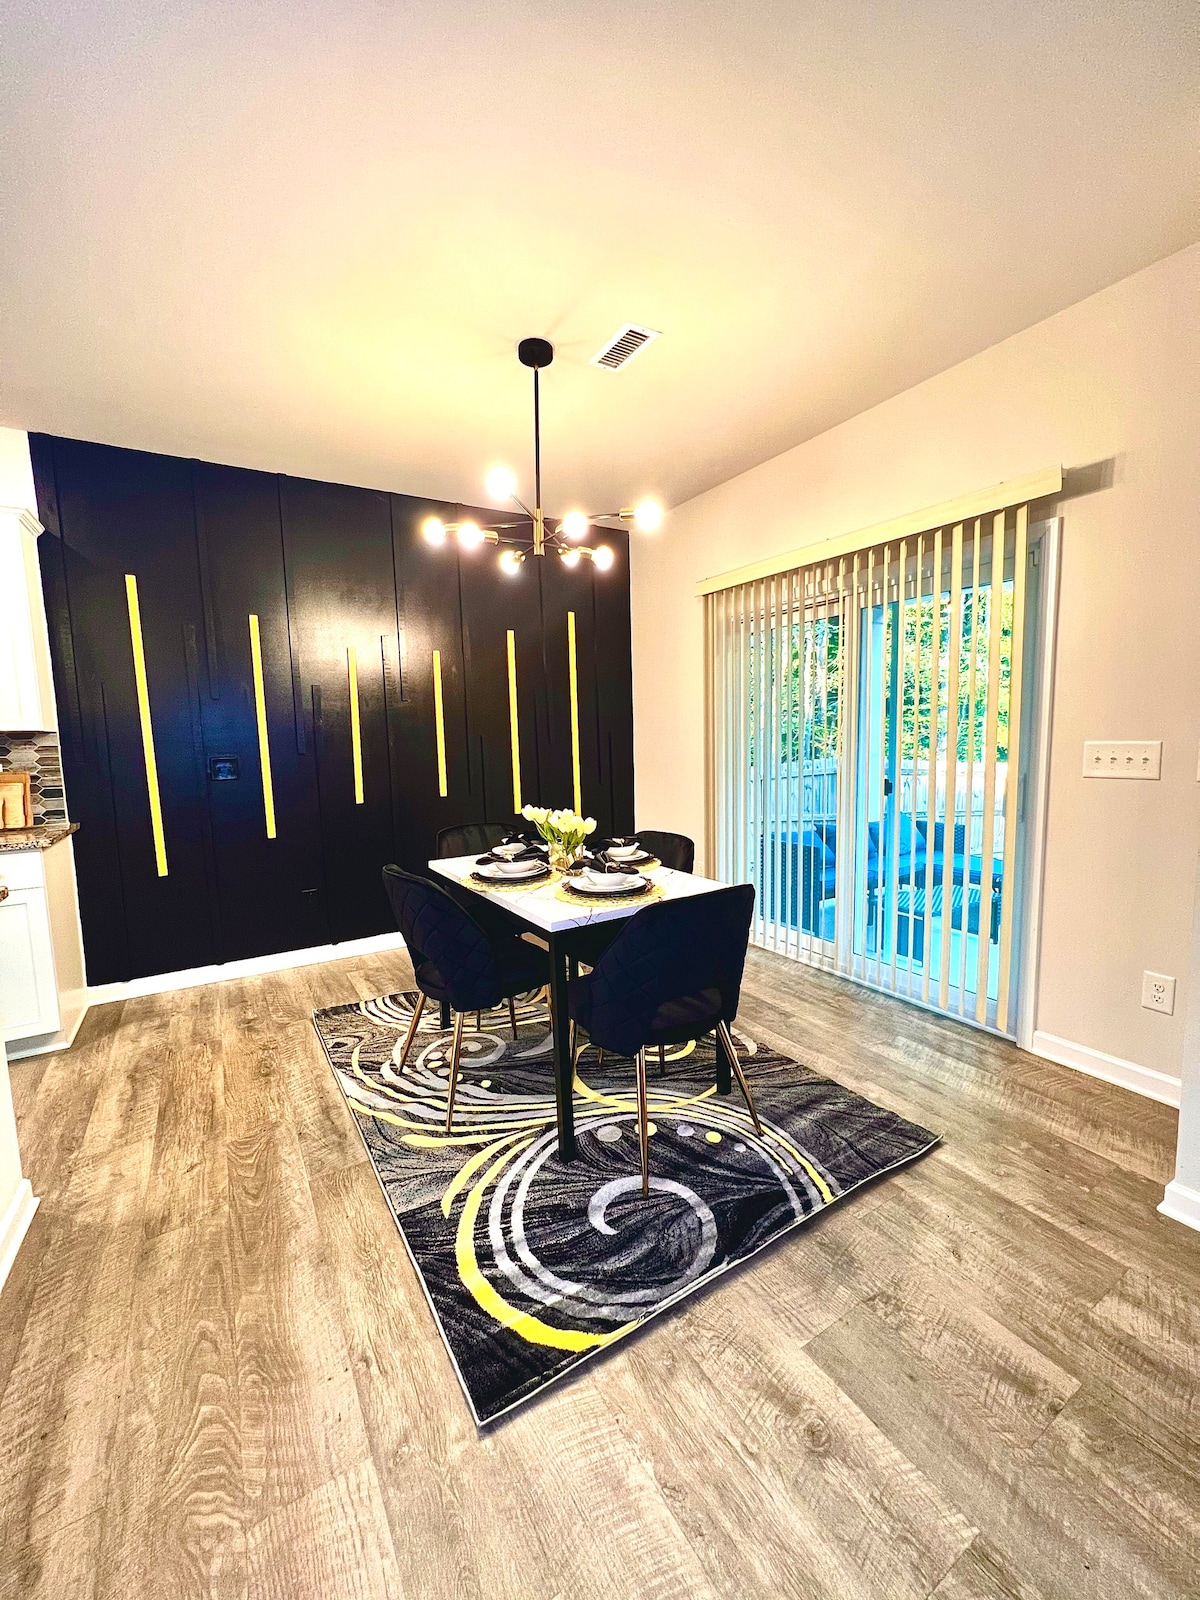 Luxury Raleigh home |15min to DT| EV car charger